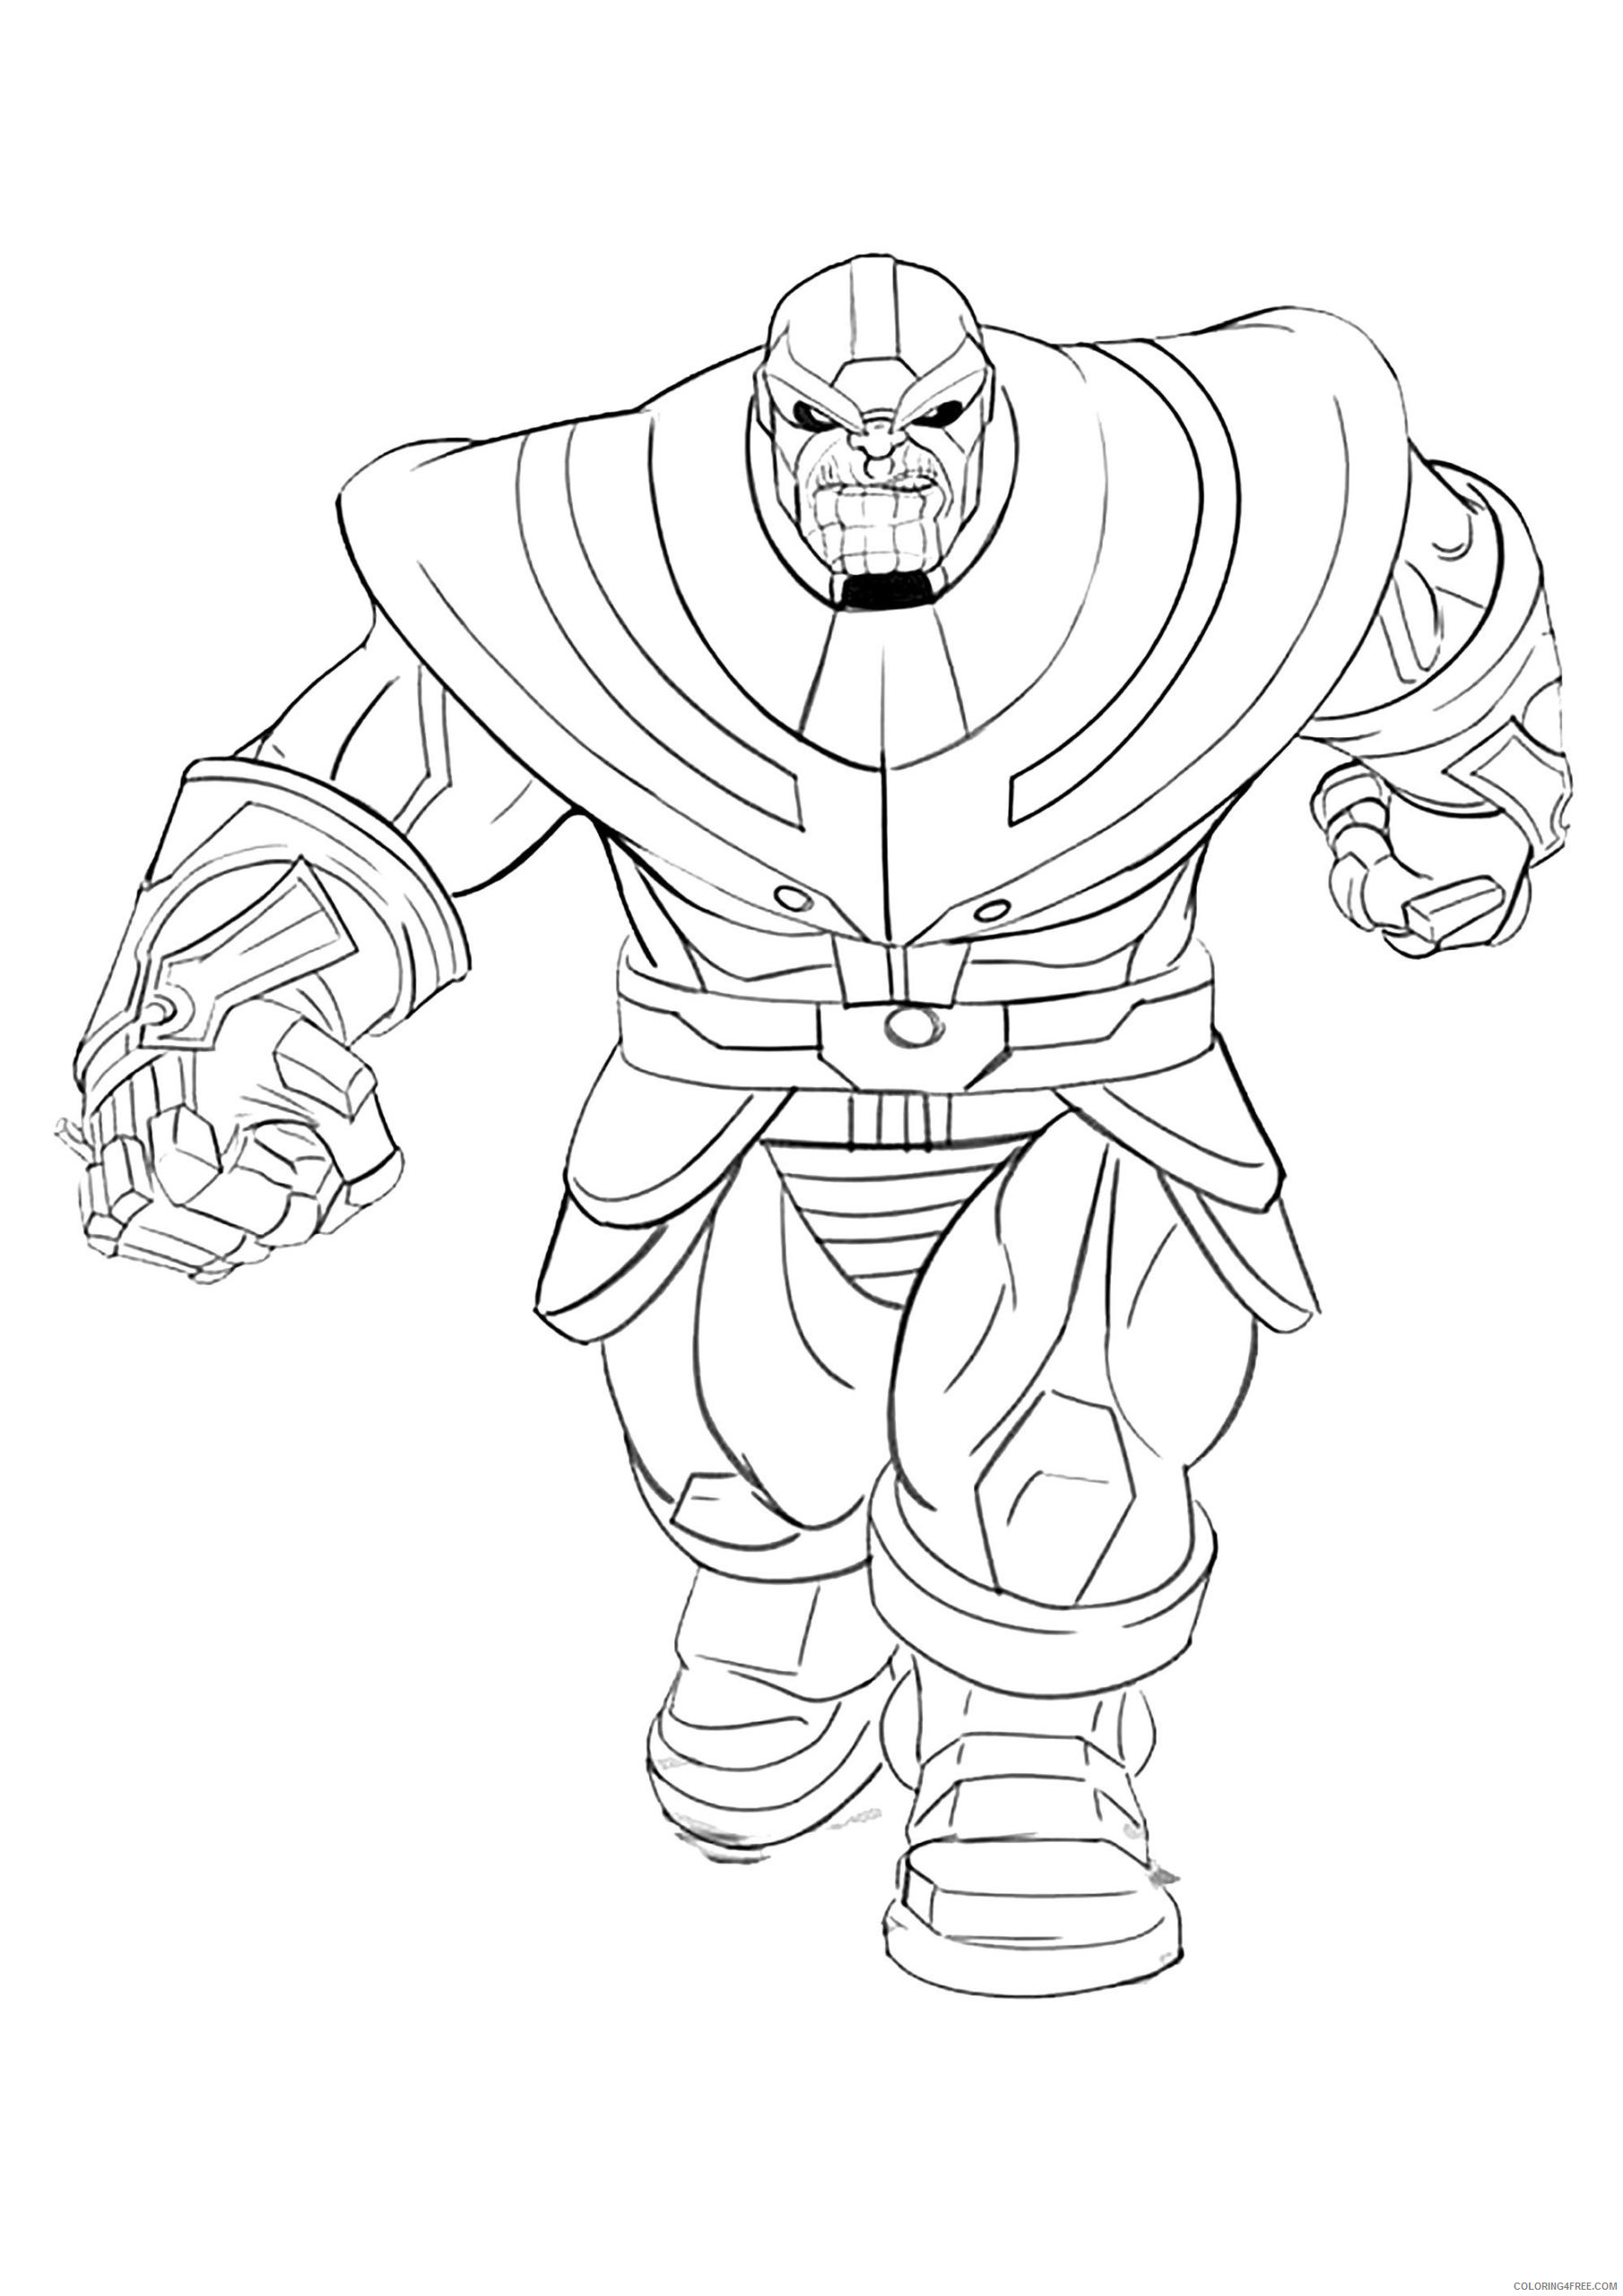 Thanos Coloring Pages Cartoons Thanos Supervillain Printable 2020 6369  Coloring4free - Coloring4Free.com